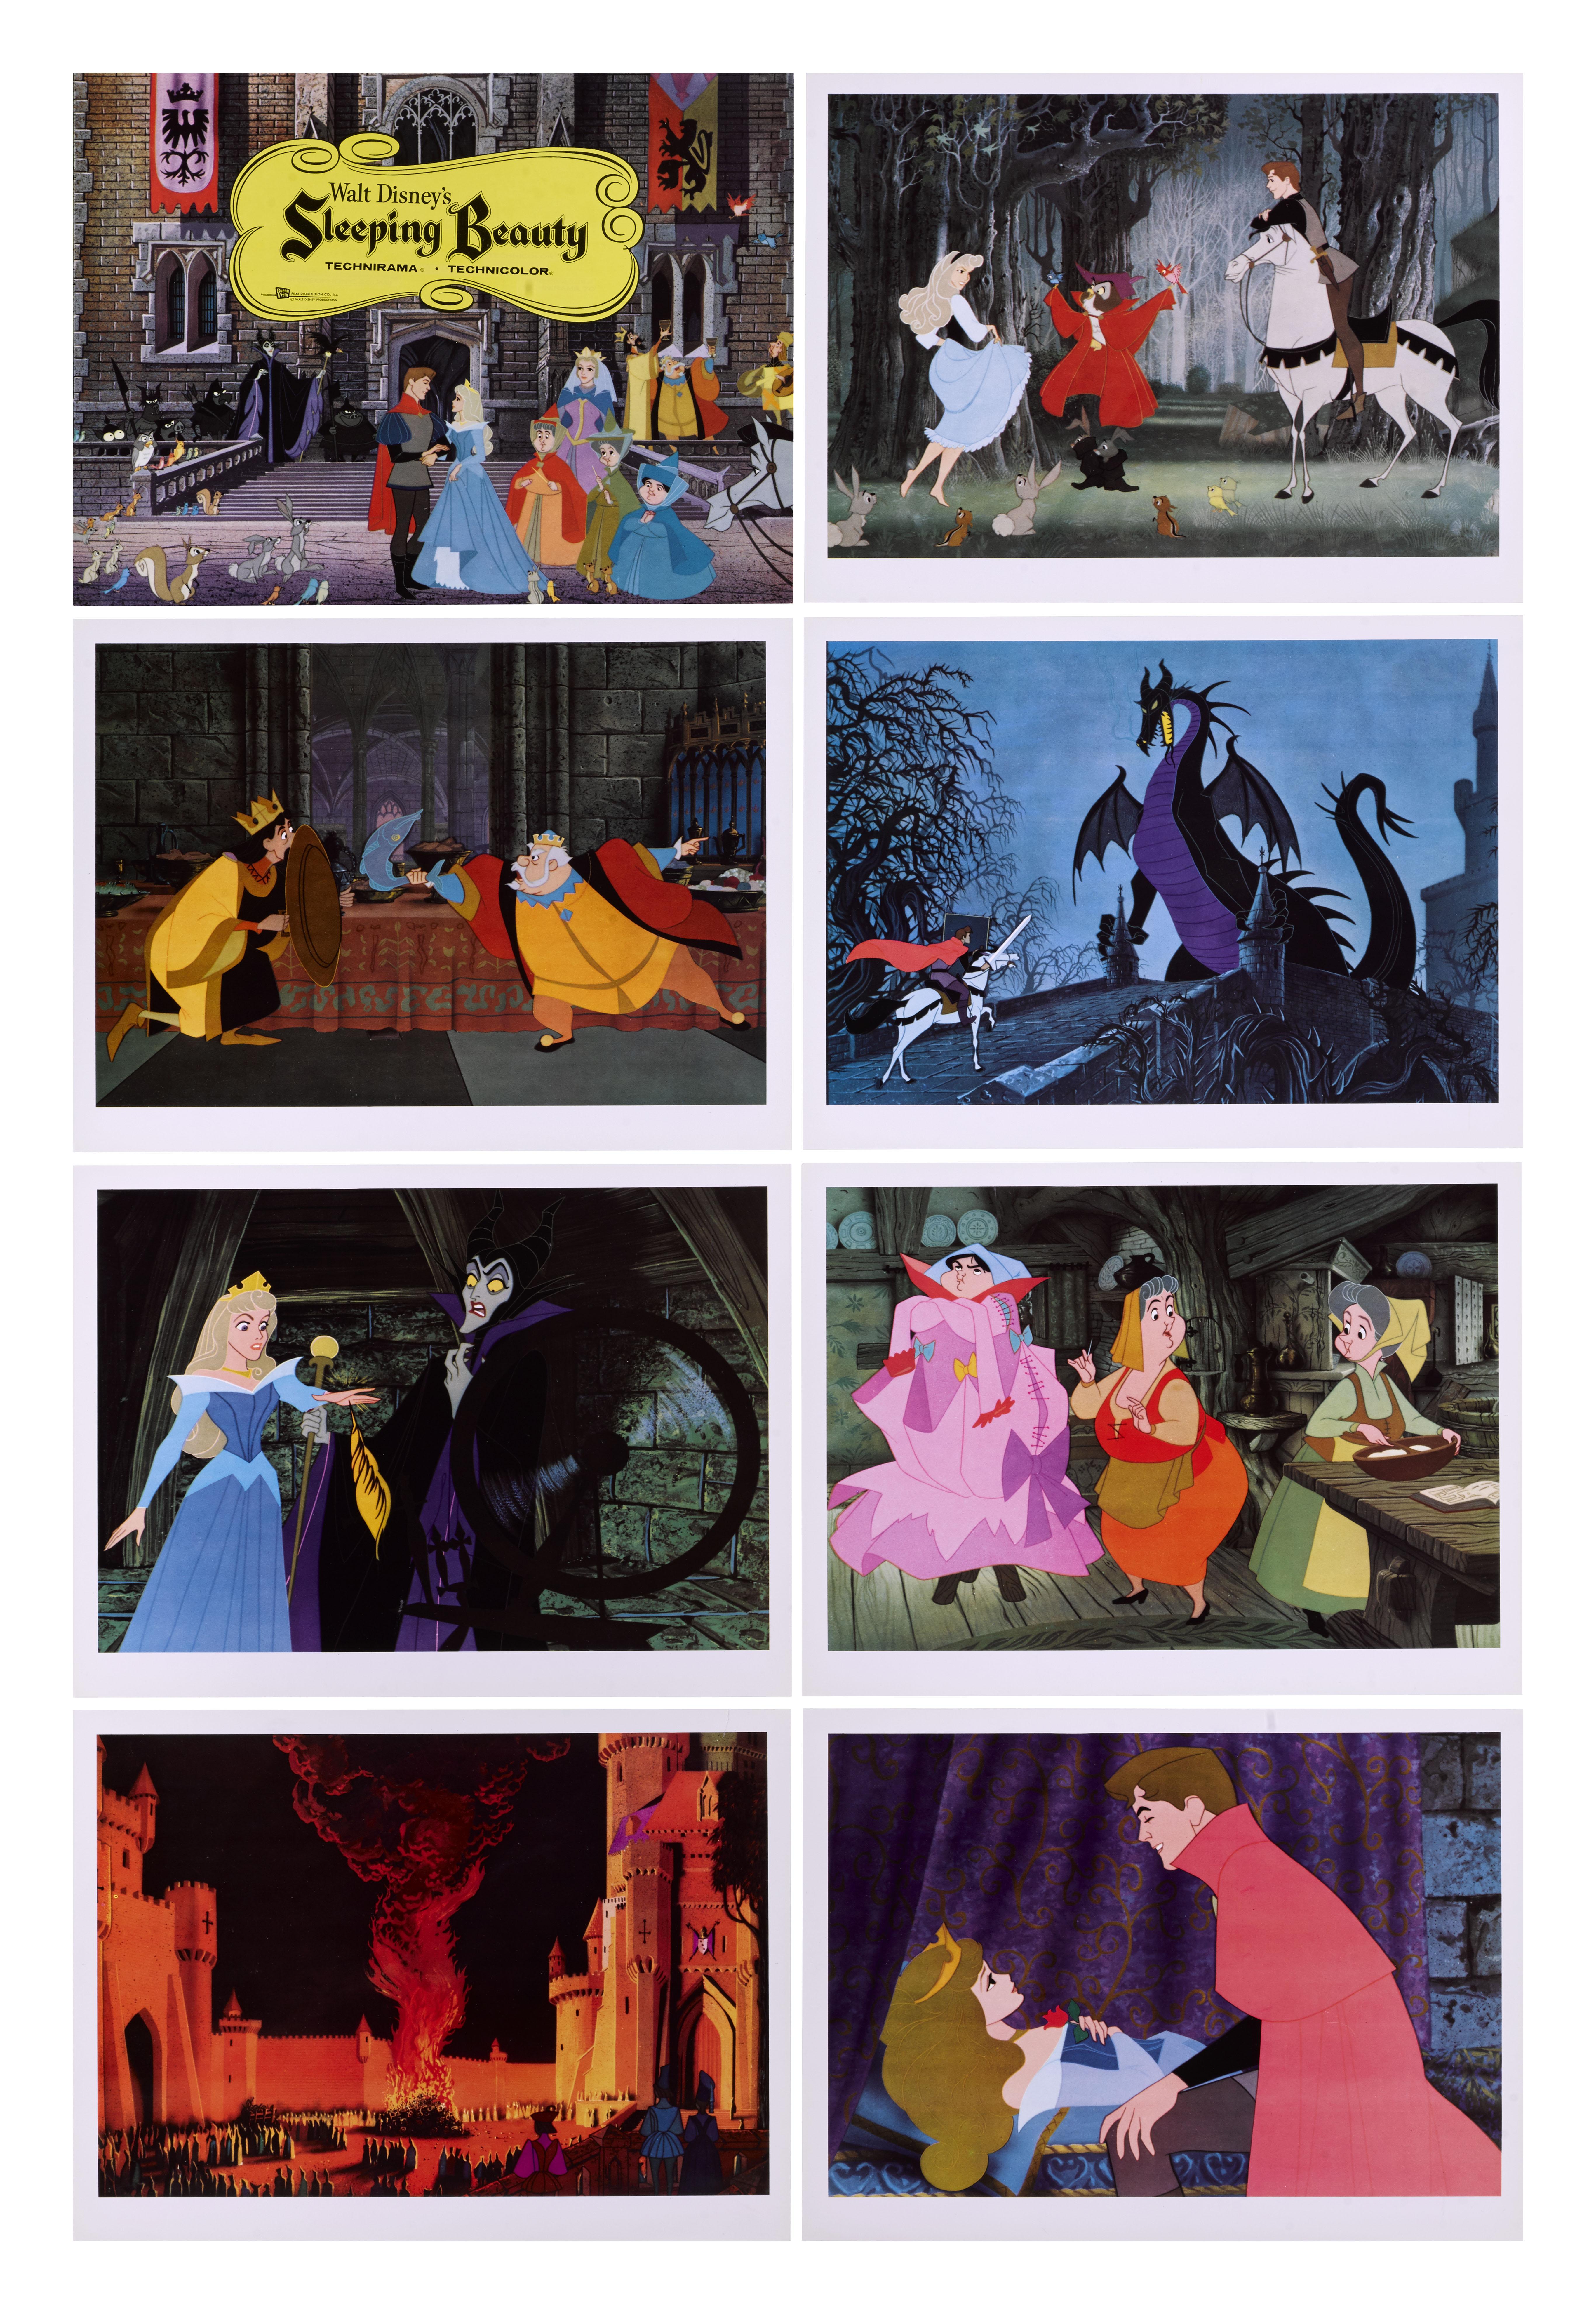 Original set of 8 US Lobby cards for the 1959 Walt Disney animation Sleeping Beauty directed by Clyde Geronimi. These Lobby cards would have been used in the cinema when the film was first released.
They would be shipped flat.